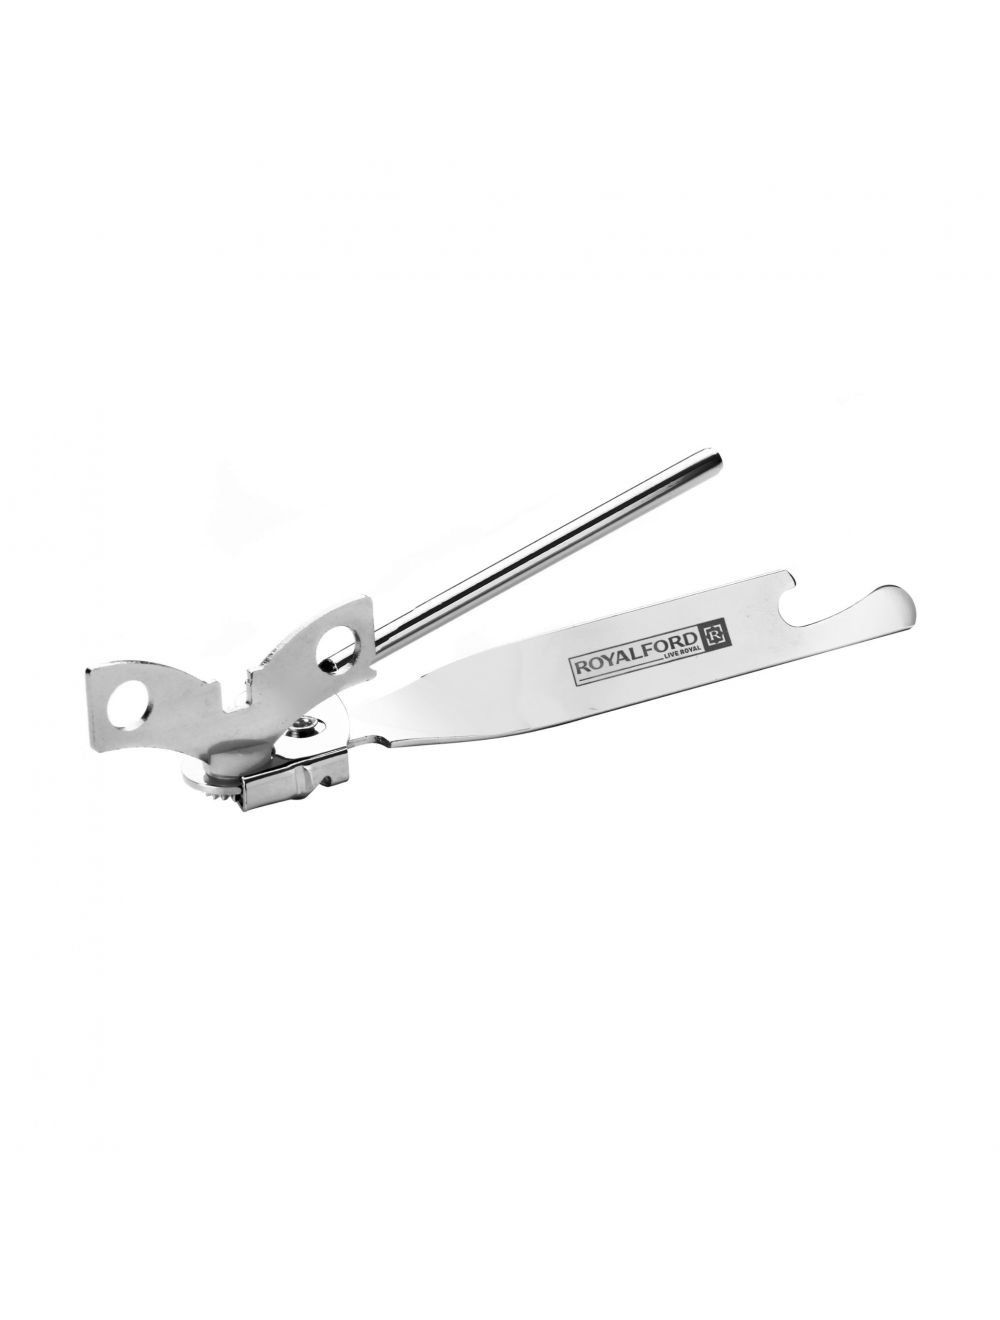 Royalford RF7441 Chrome-Plated Carbon Steel Opener